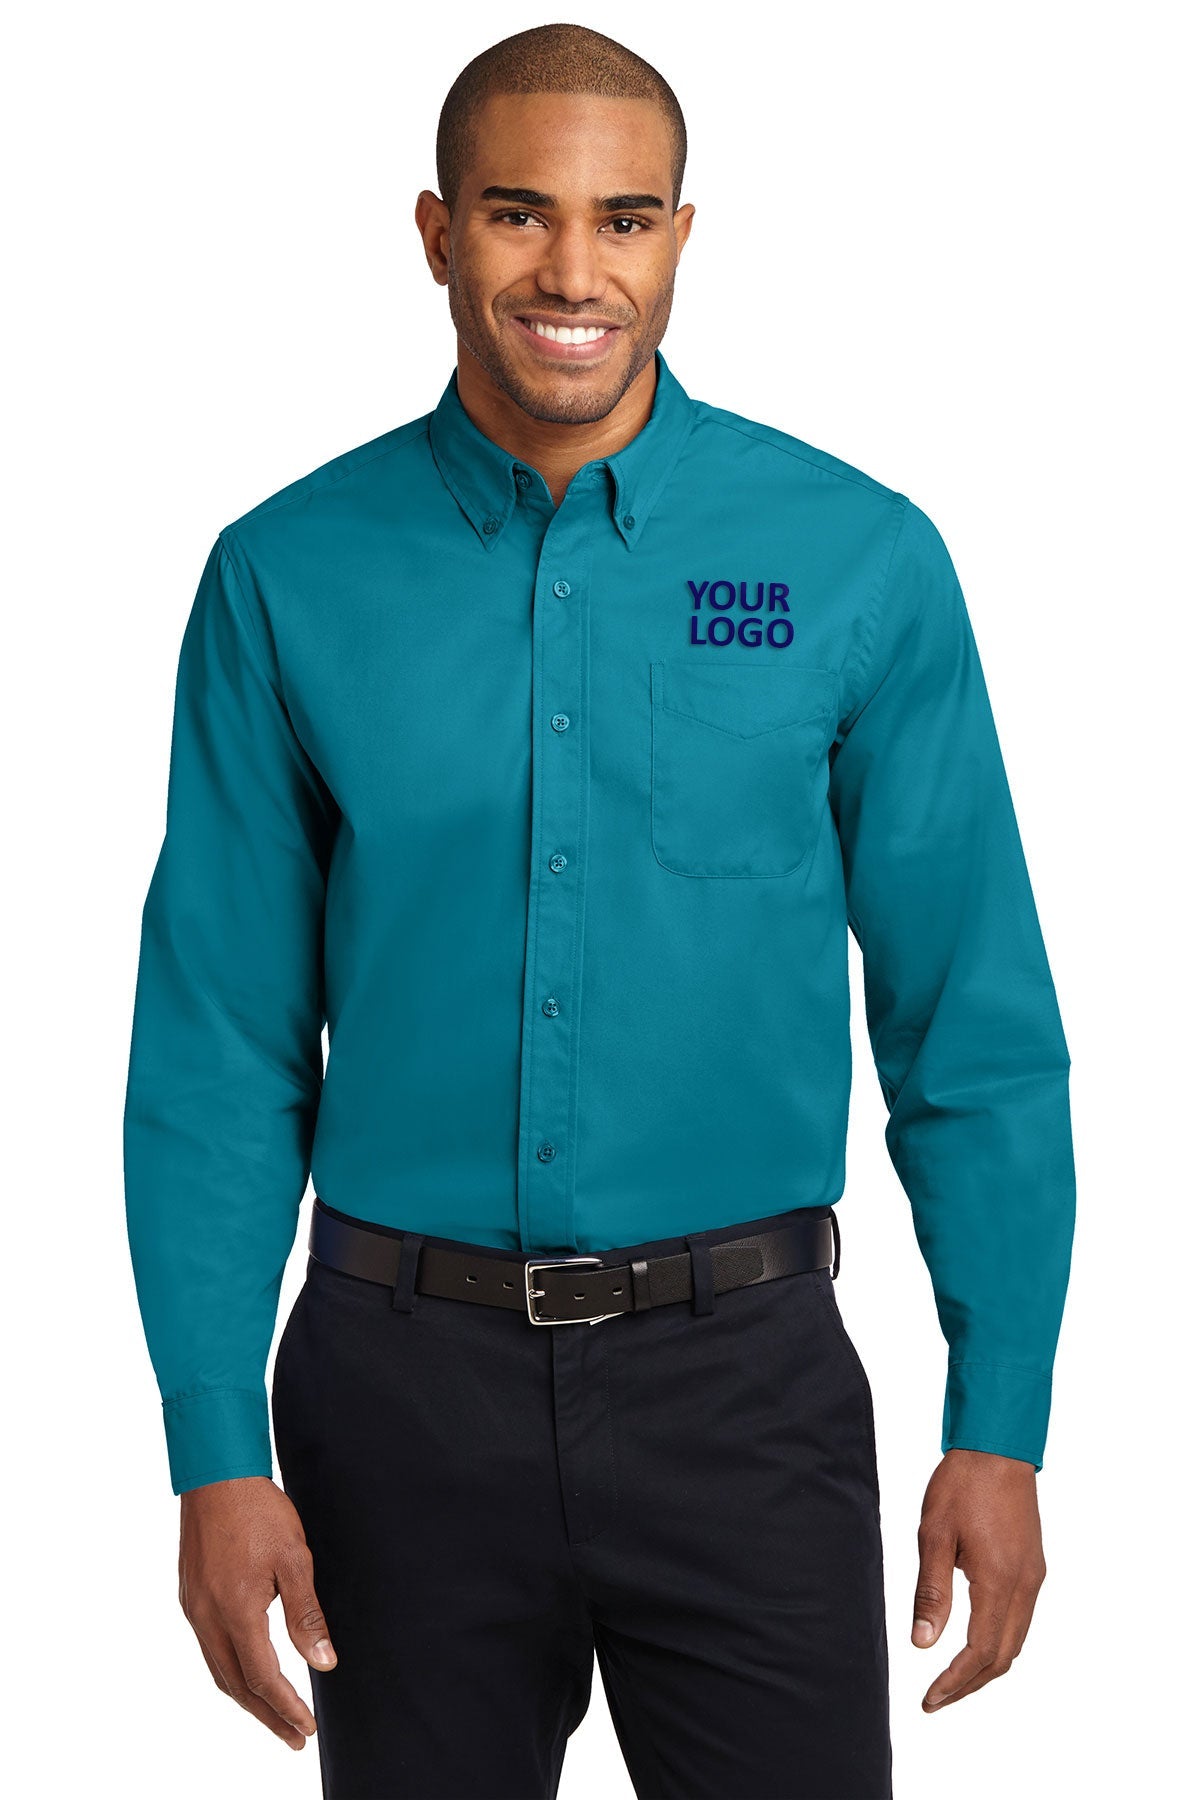 Port Authority Teal Green TLS608 embroidered work shirts